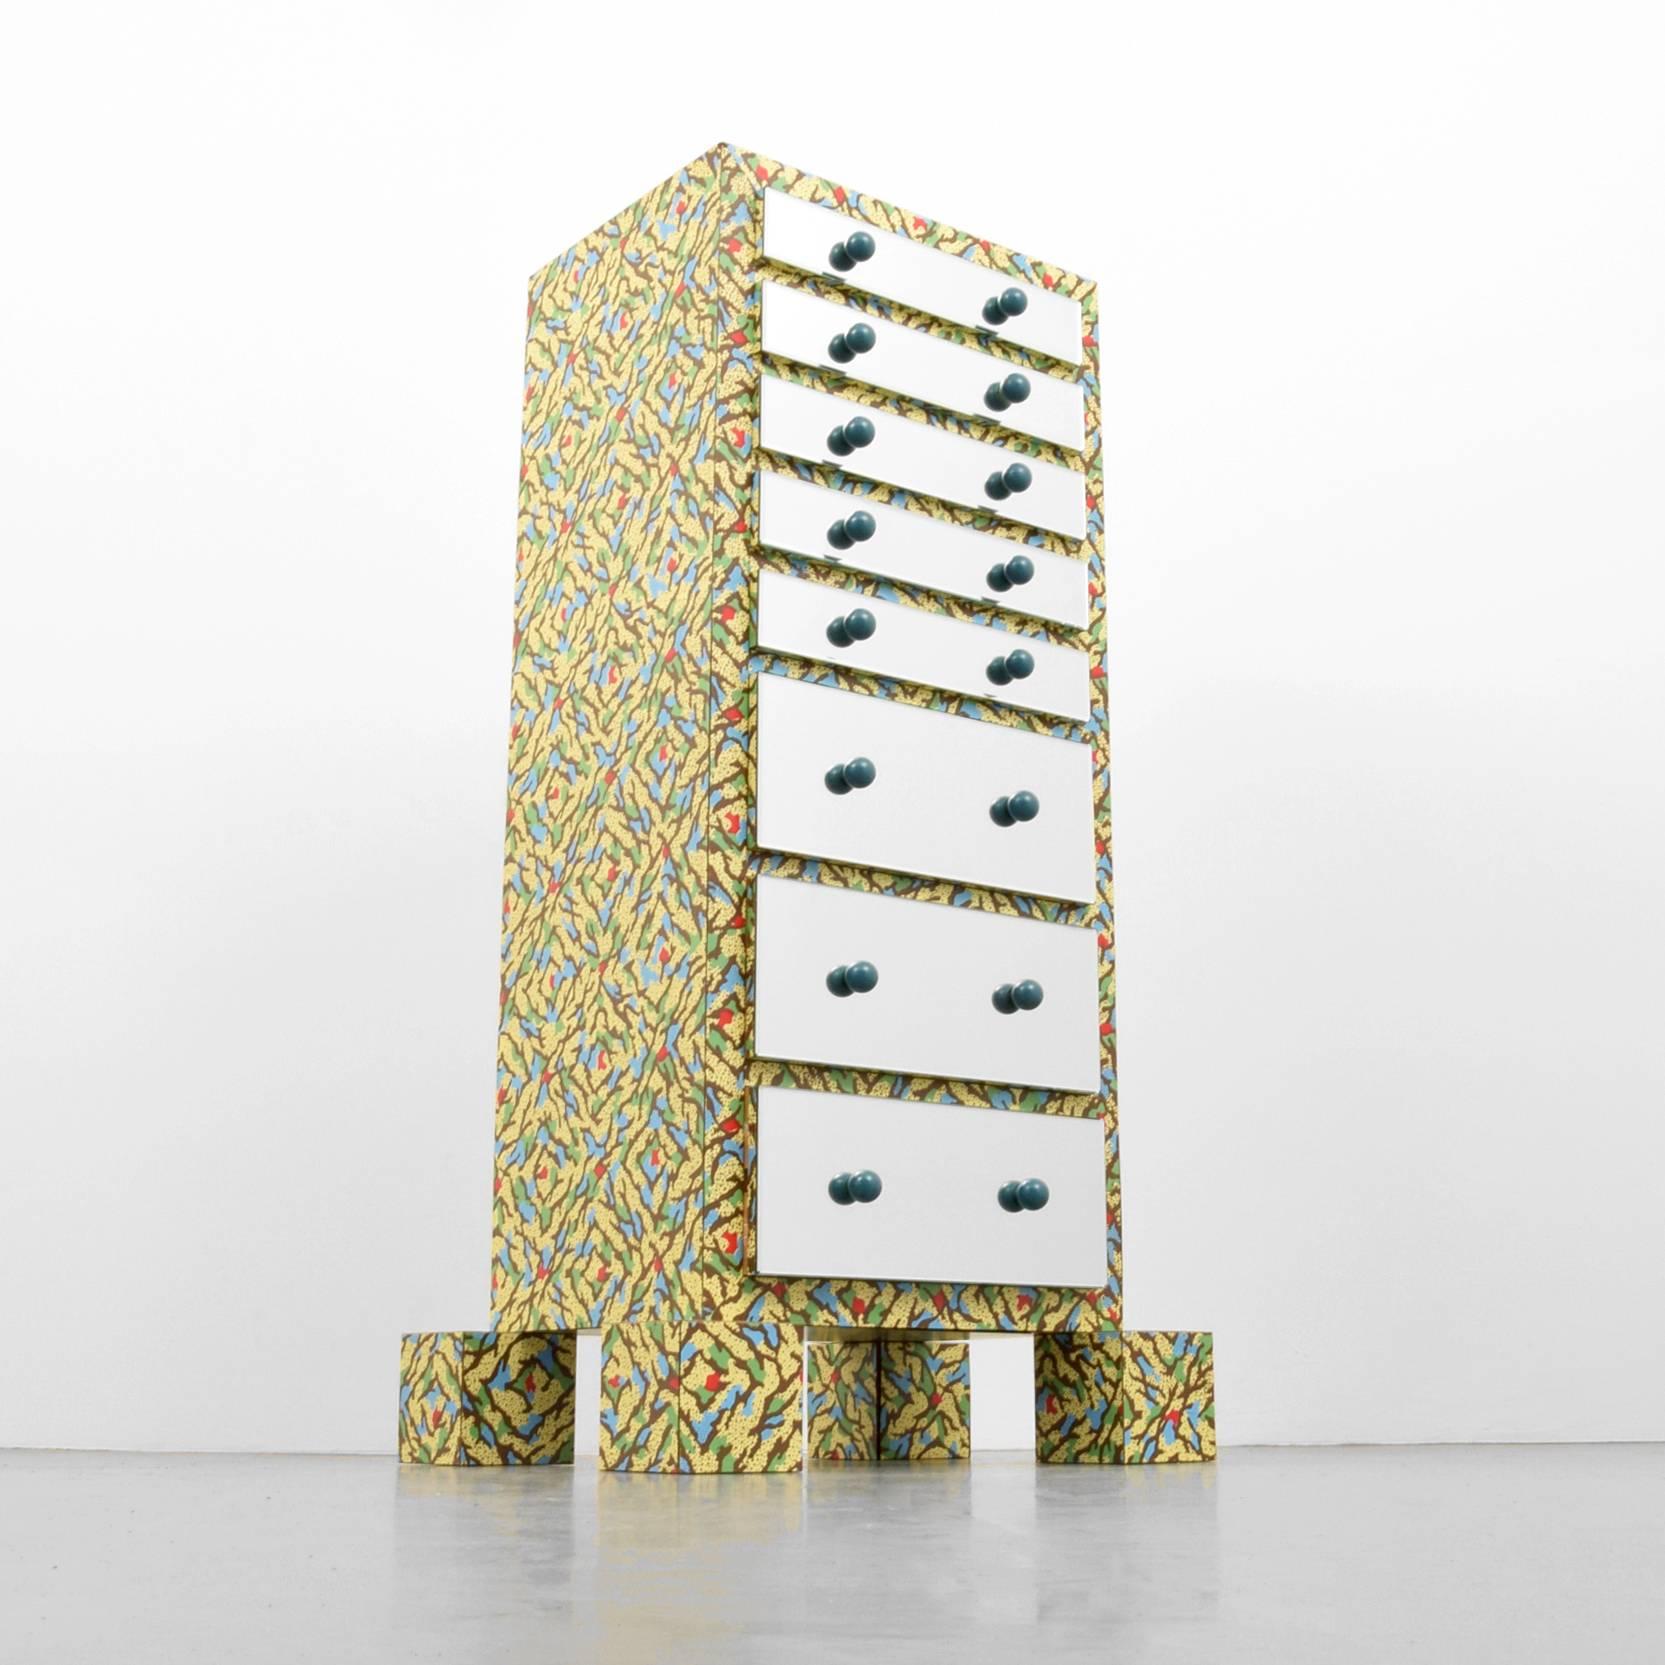 Chest by Paolo Navone for Alchimia. Cabinet has eight drawers. 

Provenance: R 20th Century, New York, New York; Collection, Boca Raton, Florida. Cabinet includes the item description tear sheet from R 20th Century Gallery. Reference (shown in situ,